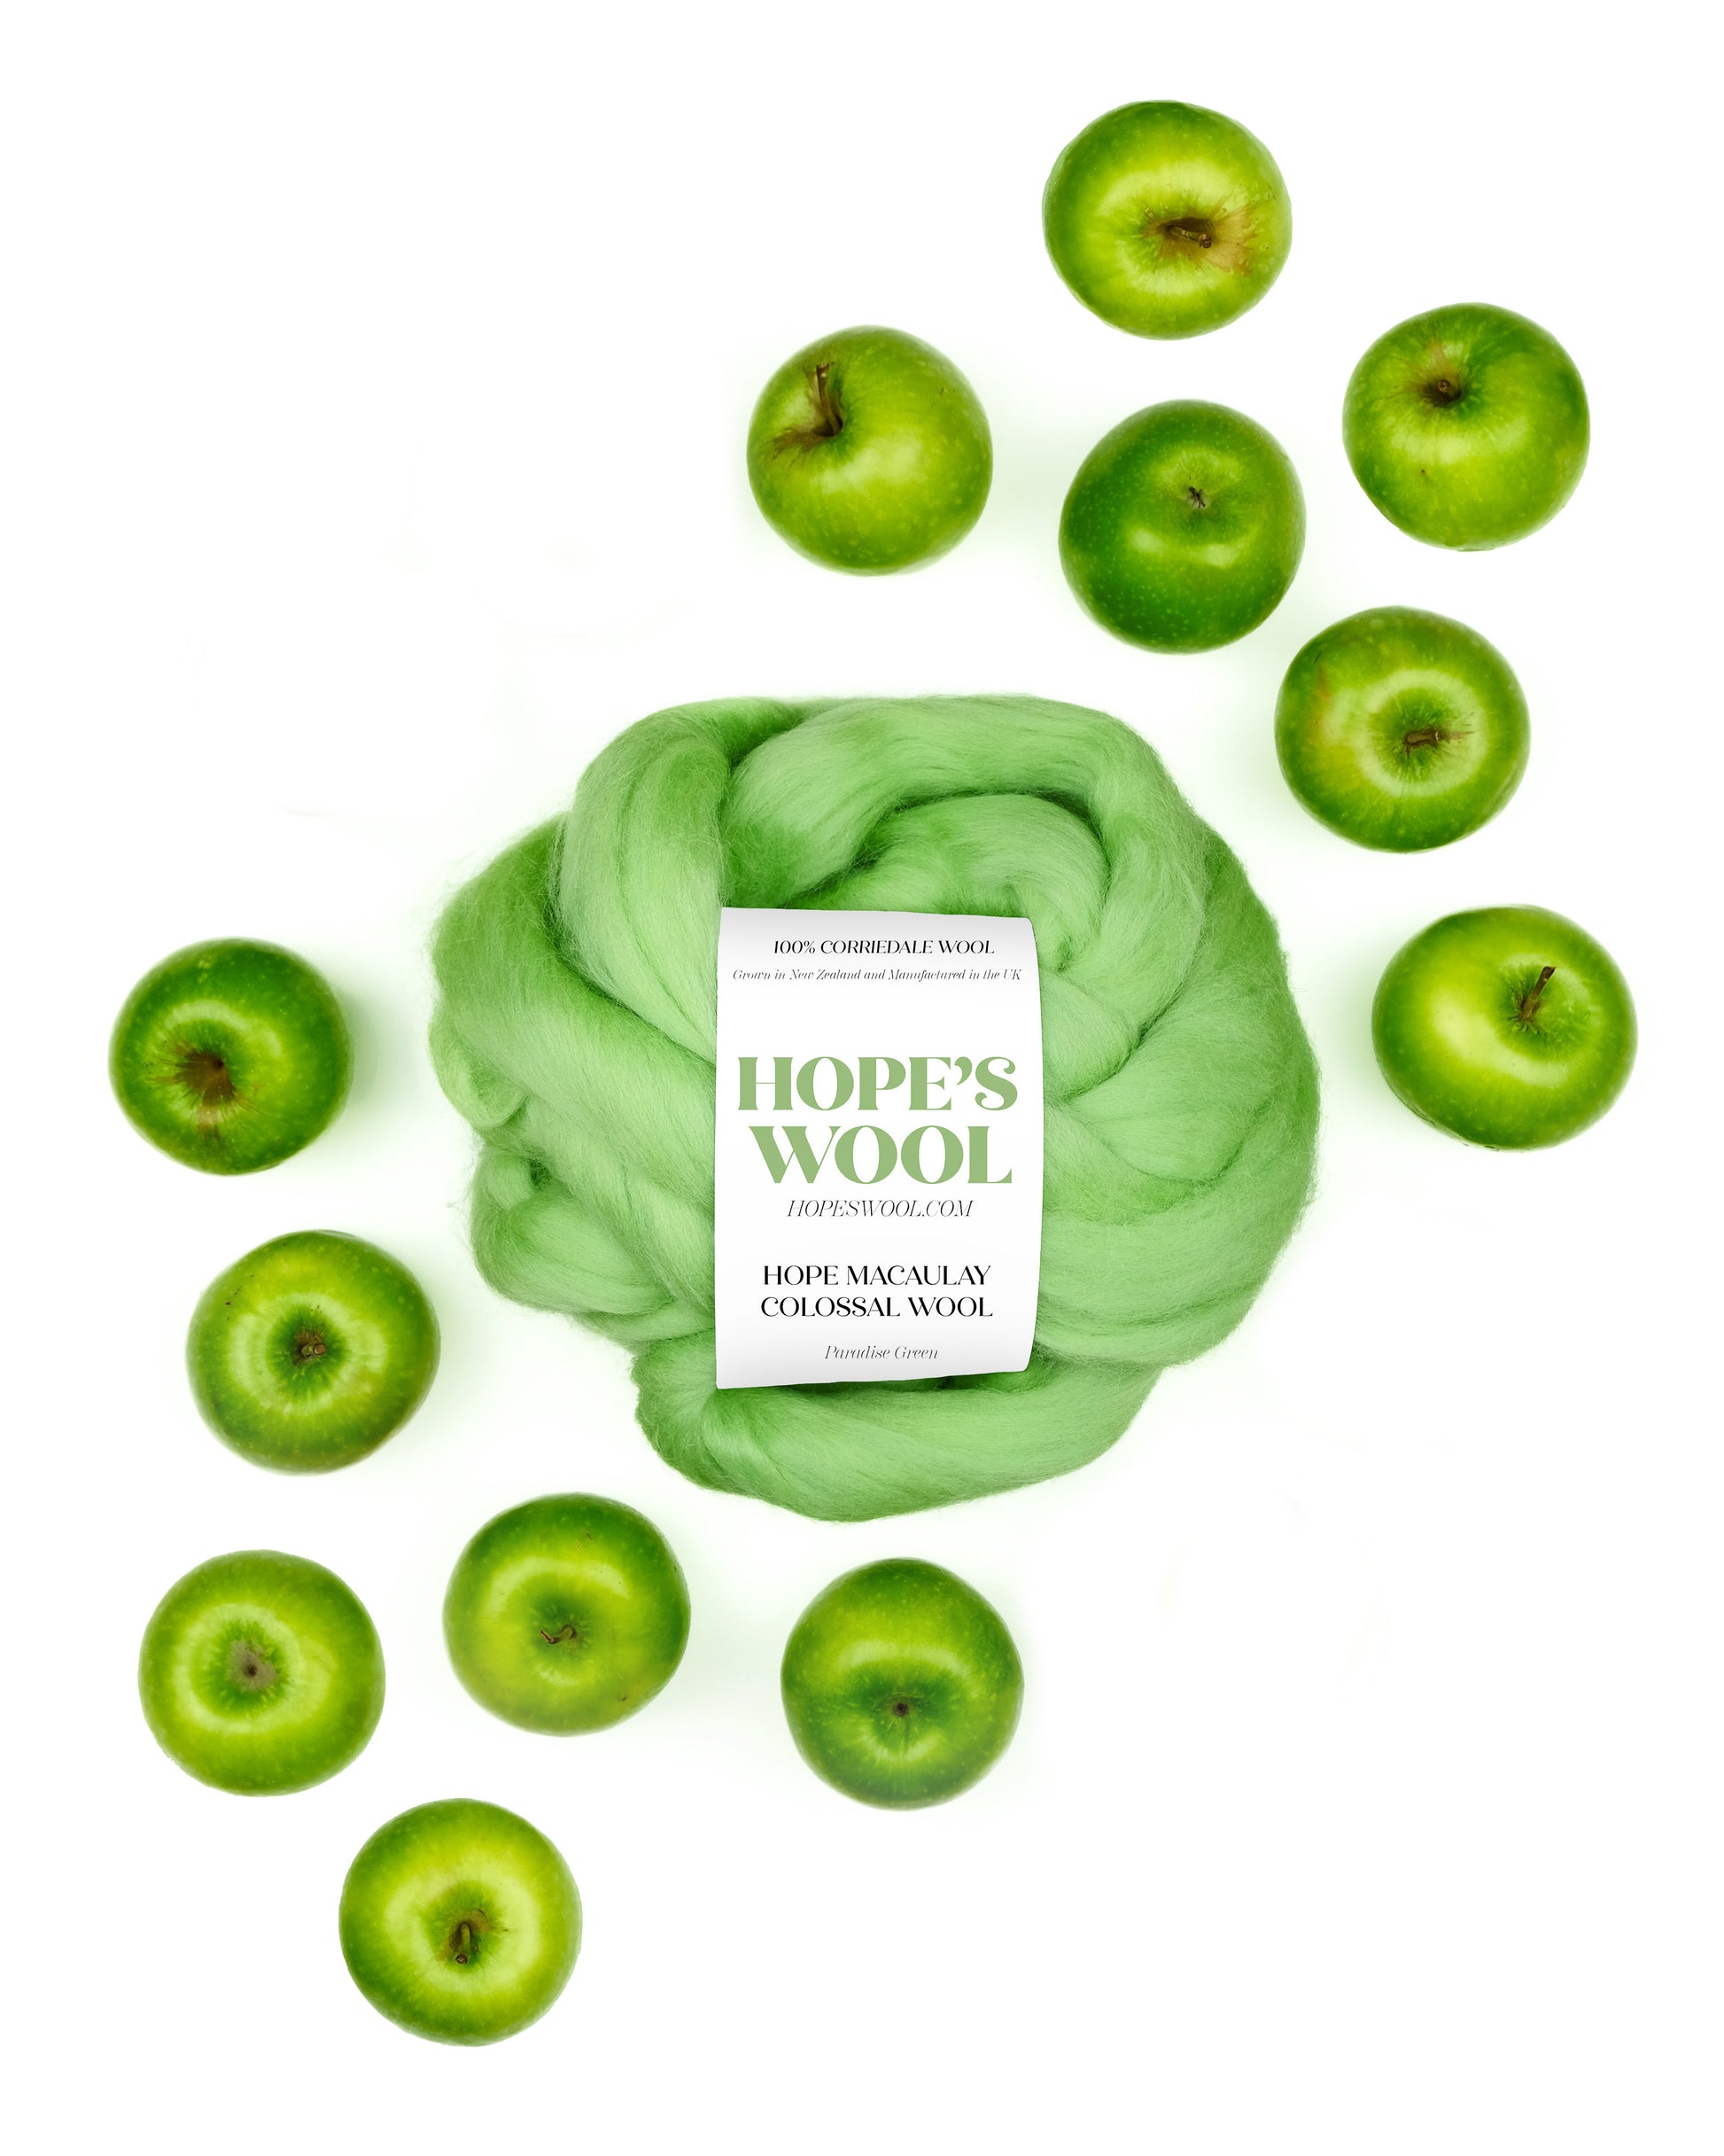 A ball of green Corriedale wool surrounded by green apples